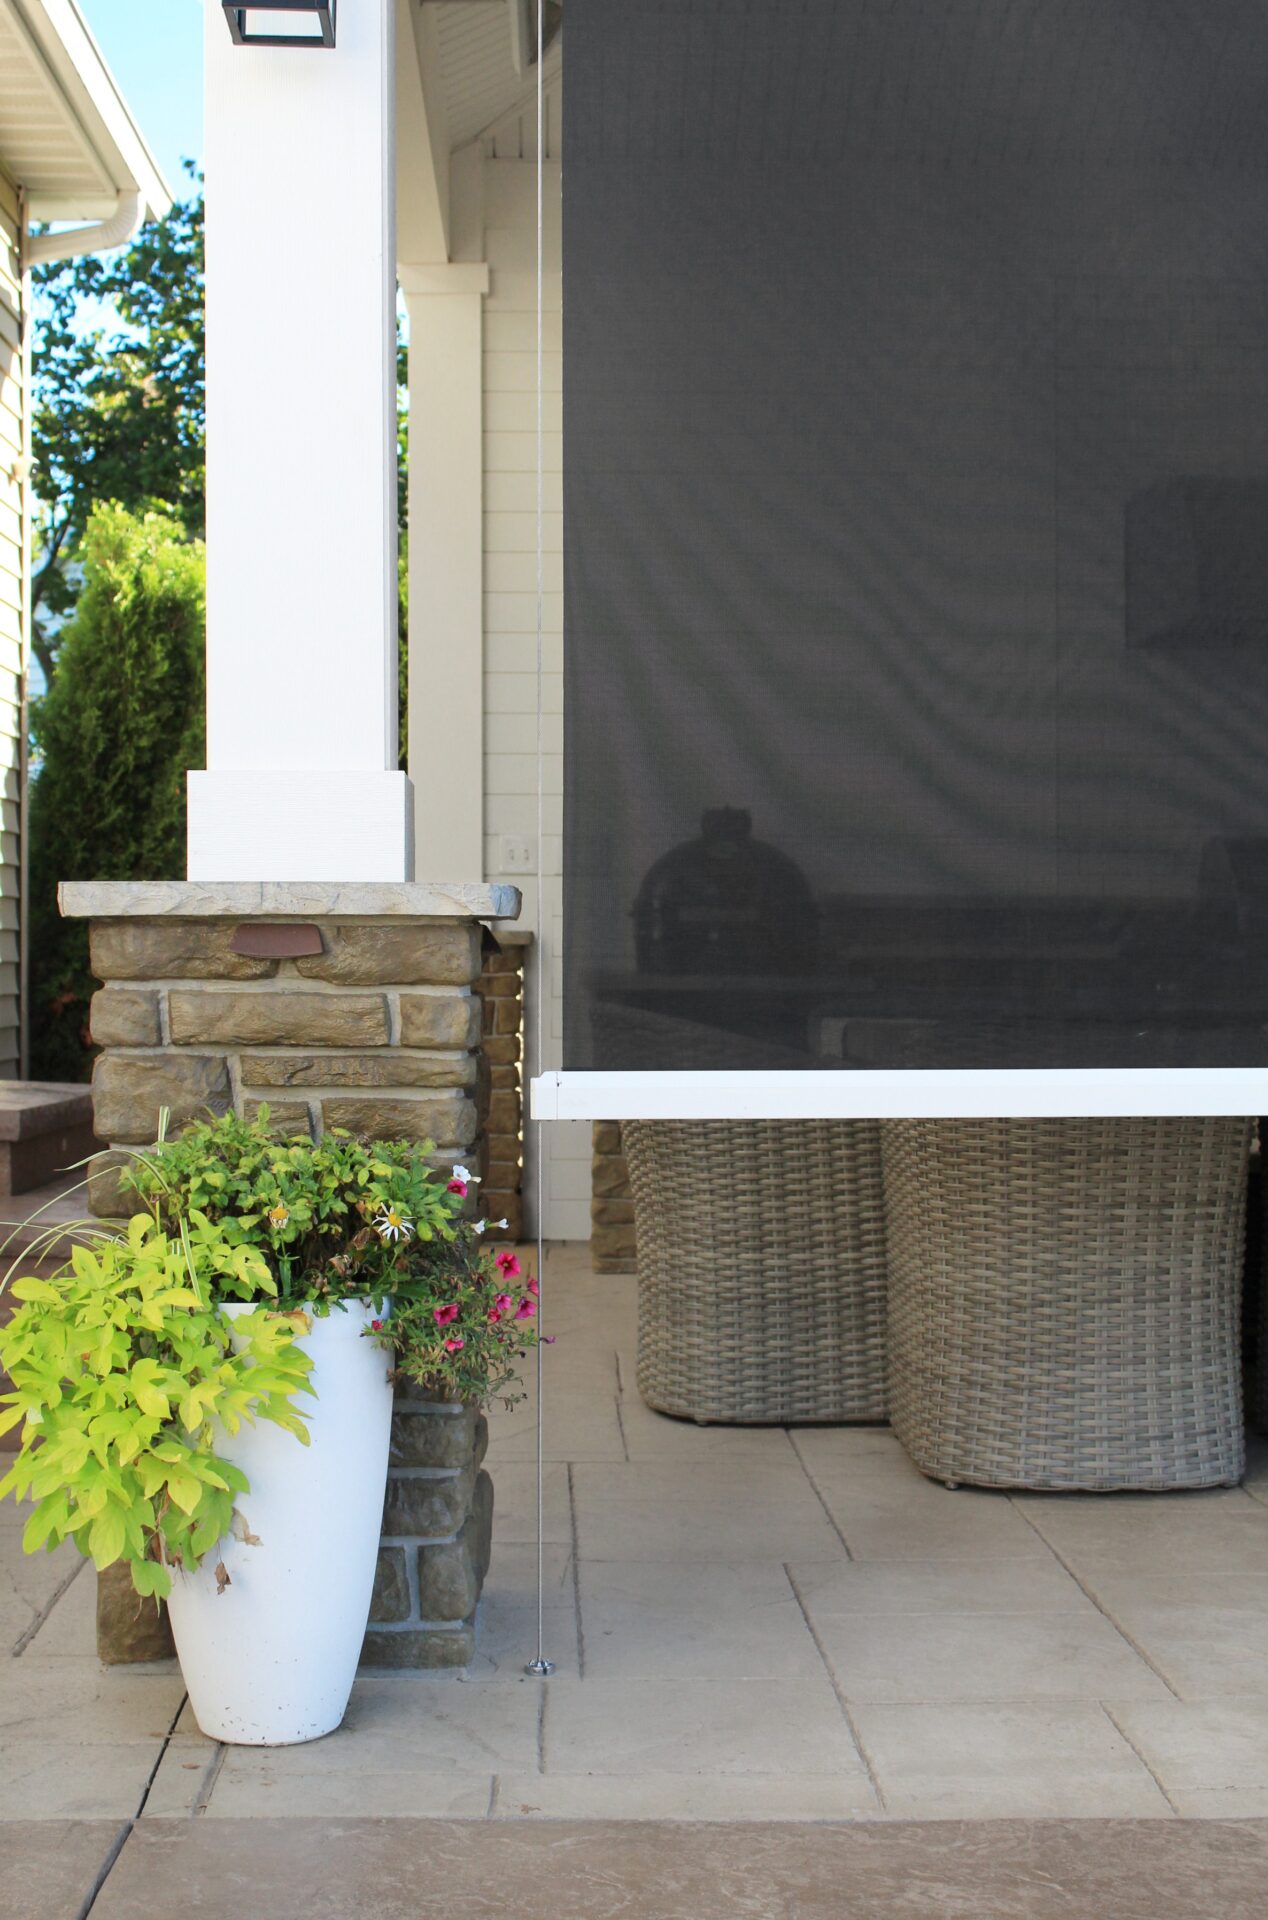 Screening Solutions Ohio transforms this outdoor patio into a screened-in porch in seconds by using Phantom Retractable Screens. The Cable Guided Screen system operates as a sun shade and runs on a cable.